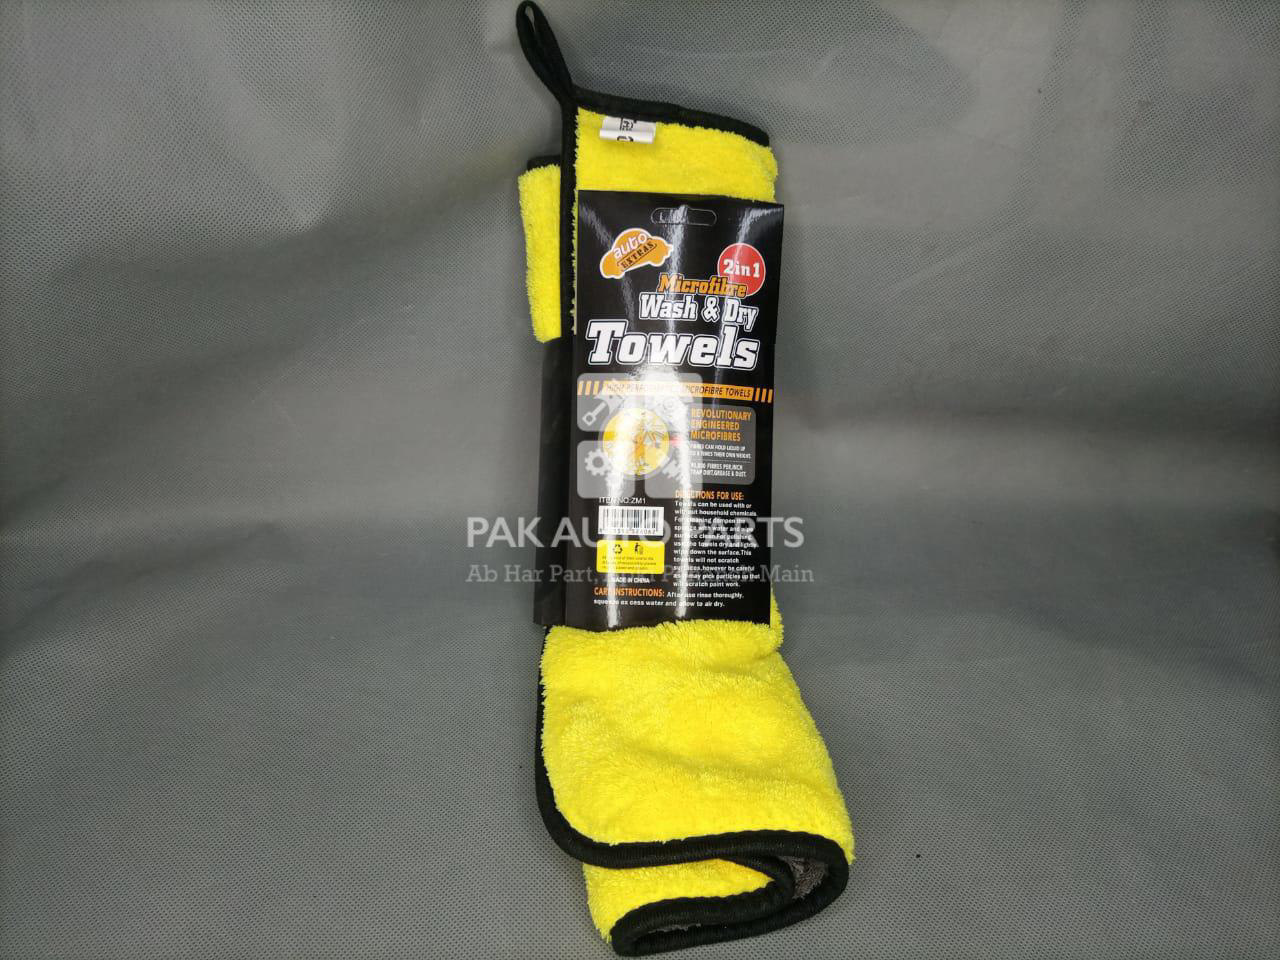 Picture of Microfiber Cleaning Cloth / Towel – Gray and Yellow